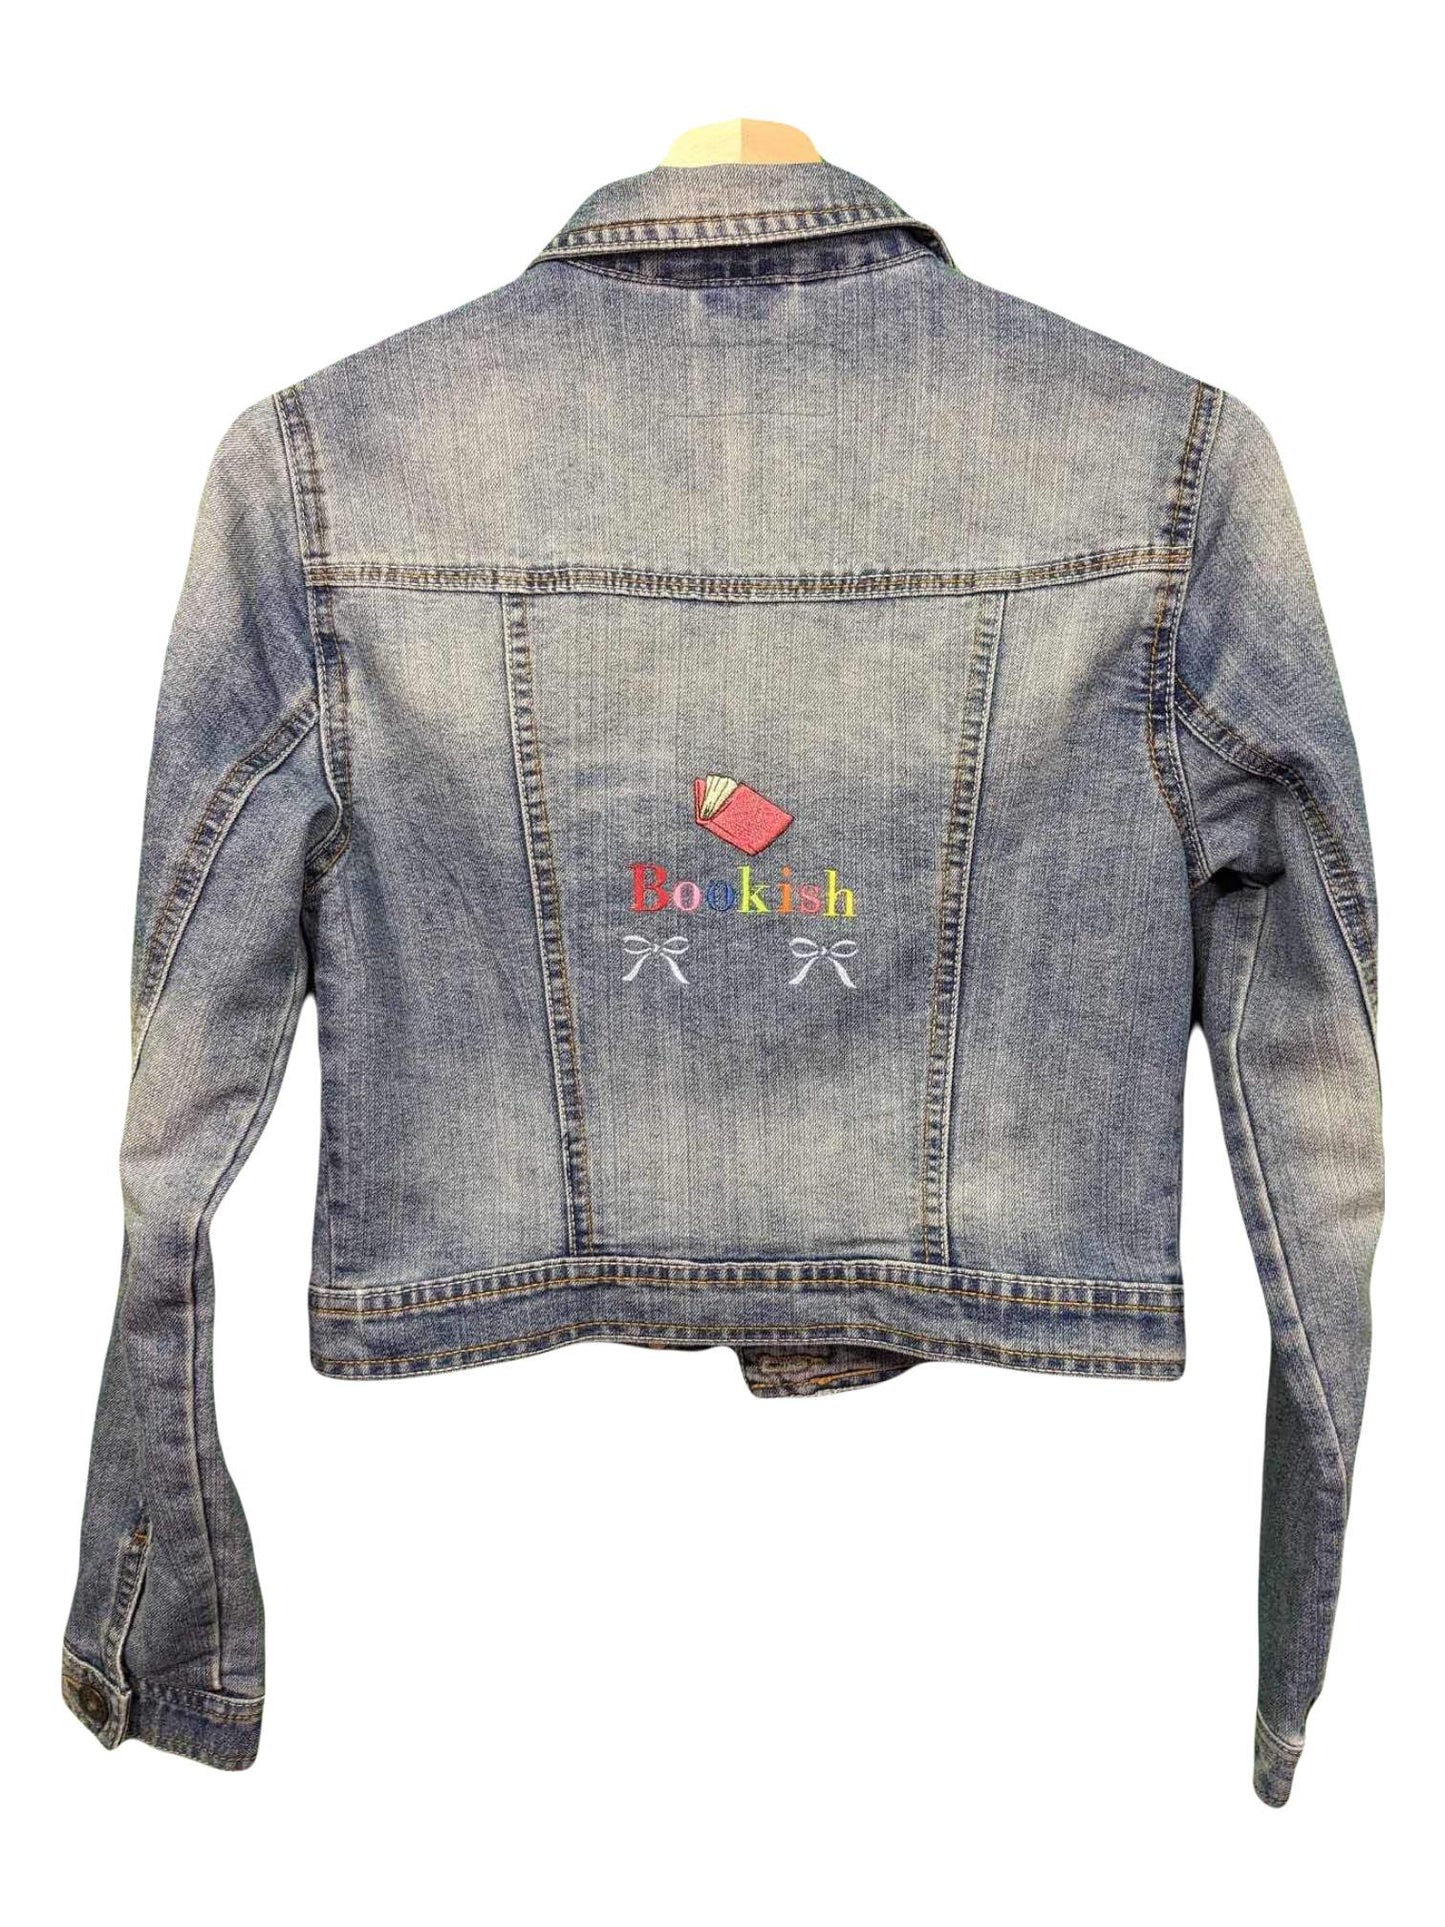 Size 10 Bookish Repurposed Denim Jacket - Book and Bow Cute Detail - Rainbow Thread